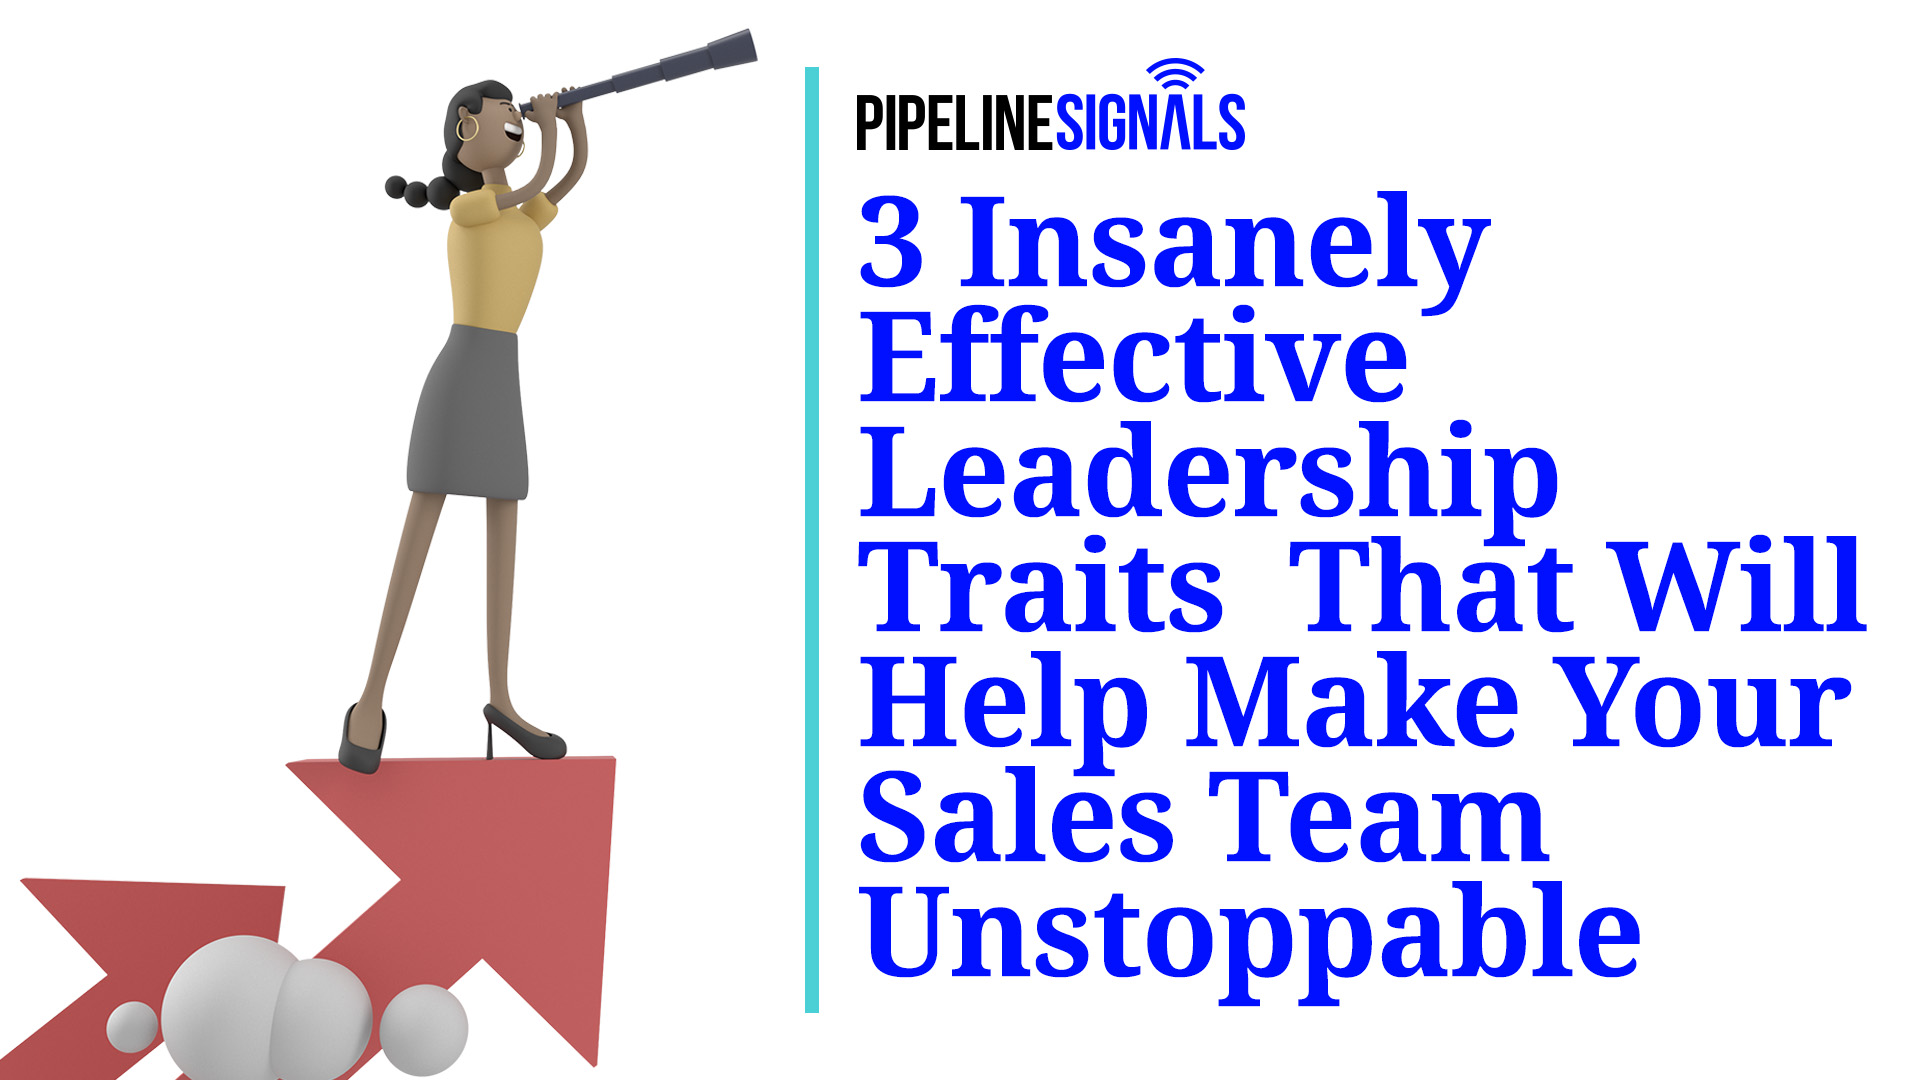 3 Insanely Effective Sales Leader Traits That Will Help Make Your Team Unstoppable